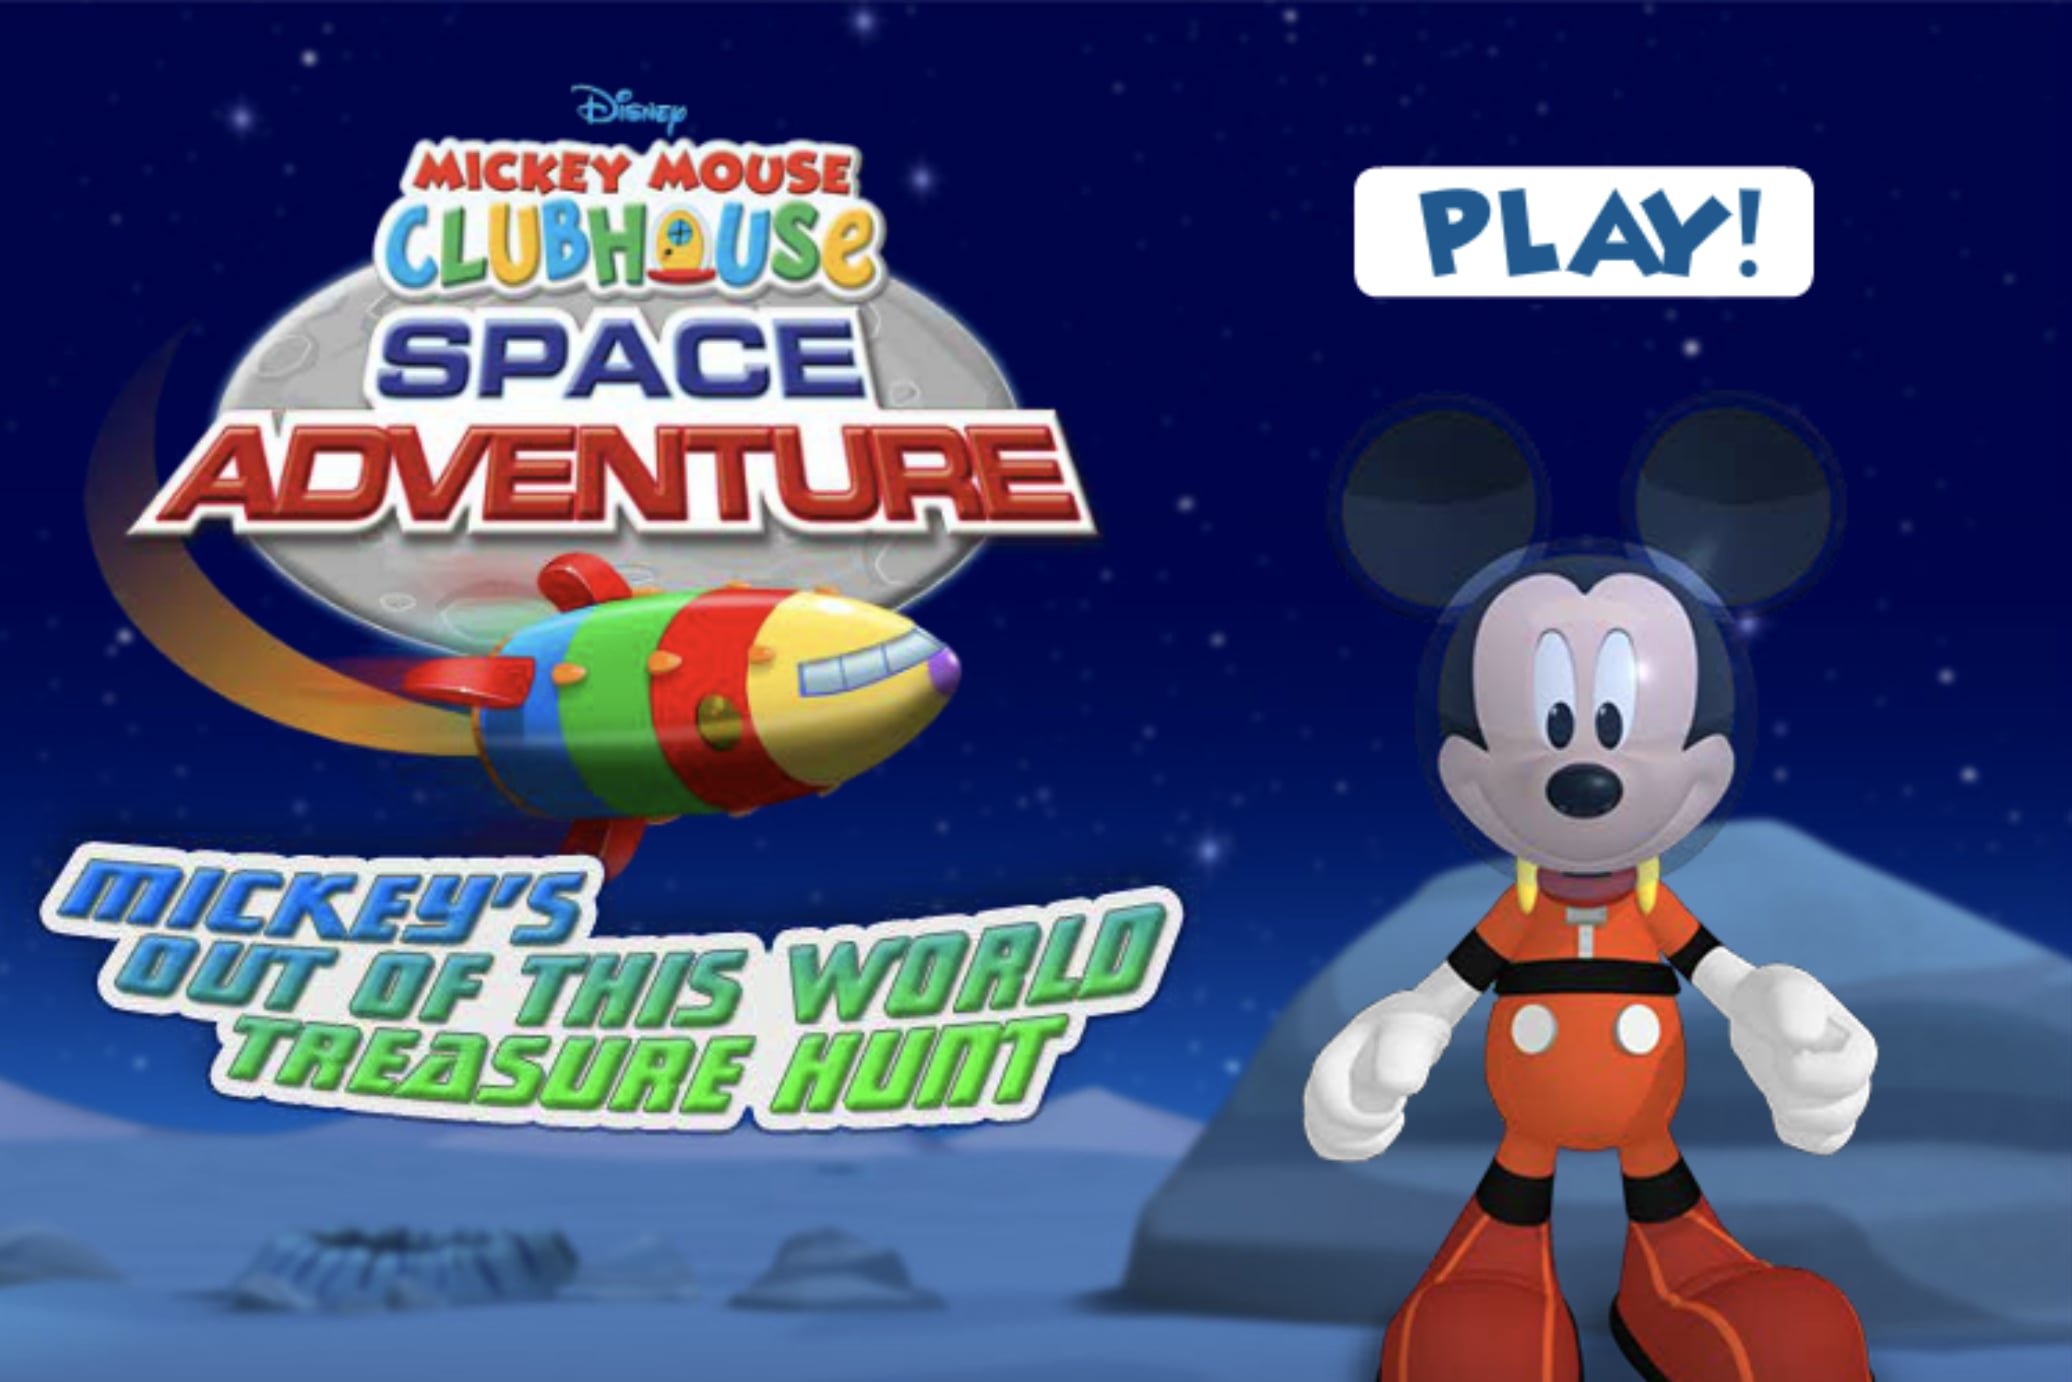 MICKEY MOUSE CLUBHOUSE GAME Free Games online for kids in Pre-K by